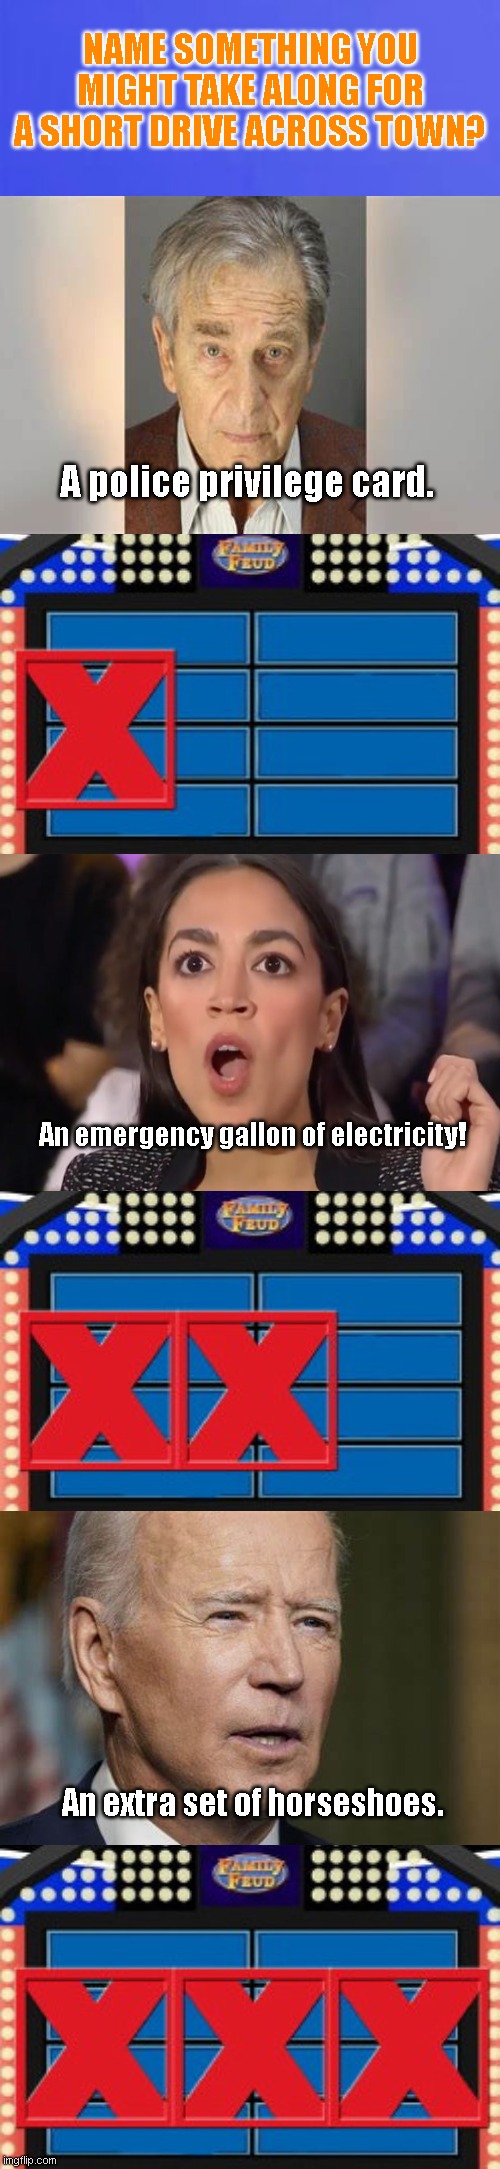 Democrat Family Feud | NAME SOMETHING YOU MIGHT TAKE ALONG FOR A SHORT DRIVE ACROSS TOWN? A police privilege card. An emergency gallon of electricity! An extra set of horseshoes. | image tagged in family feud 3 strikes,paul pelosi,crazy aoc,joe biden,democrats,political humor | made w/ Imgflip meme maker